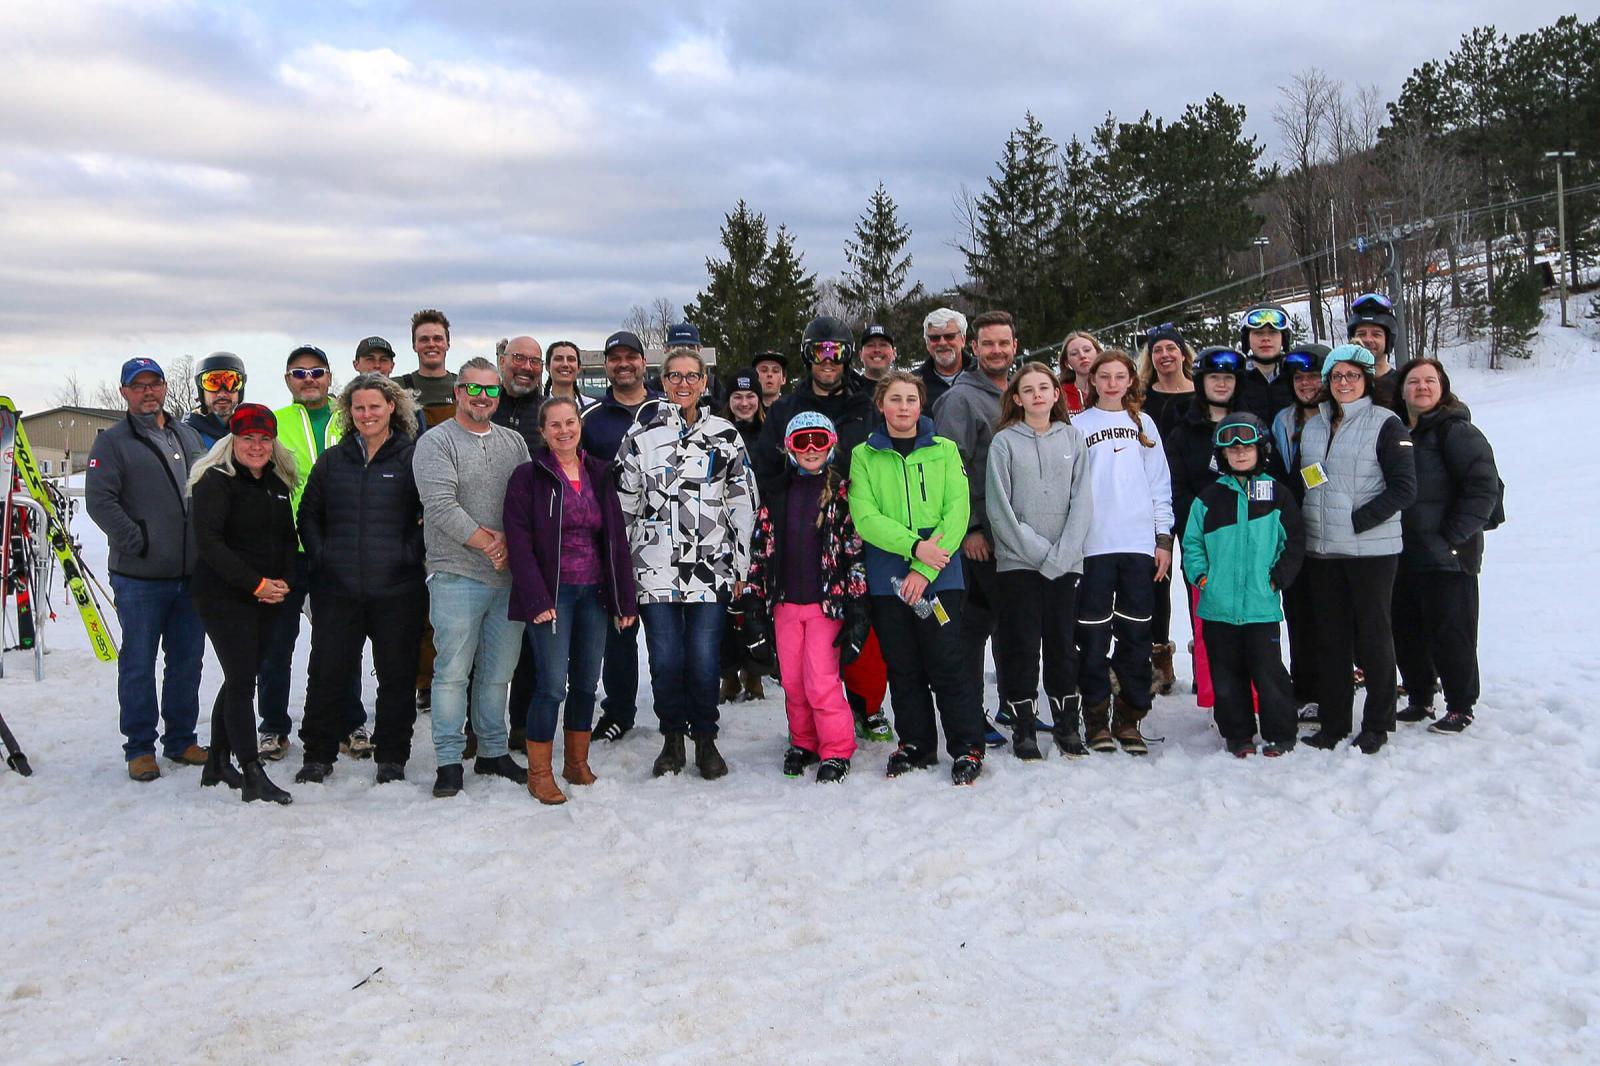 Participants of the 2023 Snow Day gathered for a group photo at the base of the ski hill.